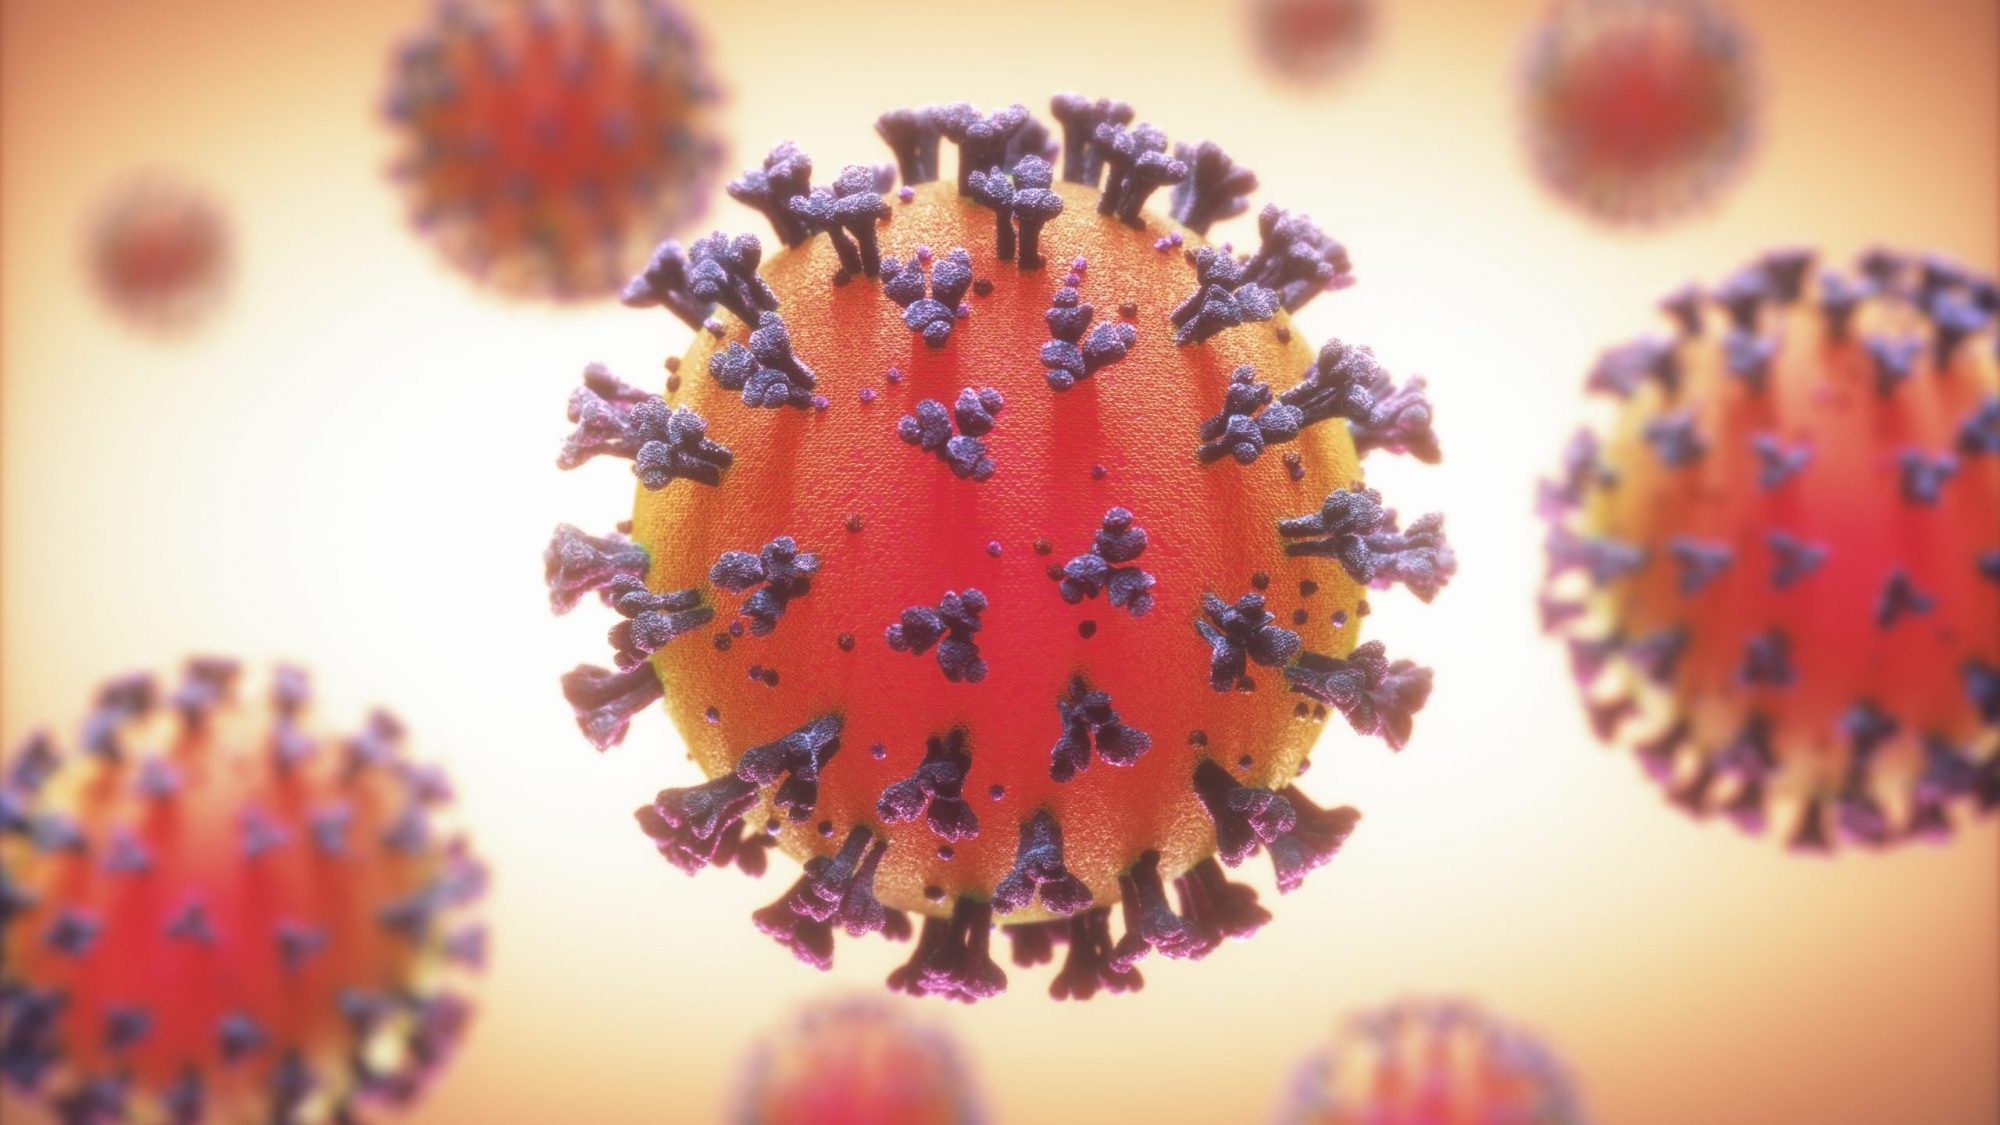 Red round virus with purple spike proteins fanning out, an illustration of the Sars-Cov-2 virus particle.